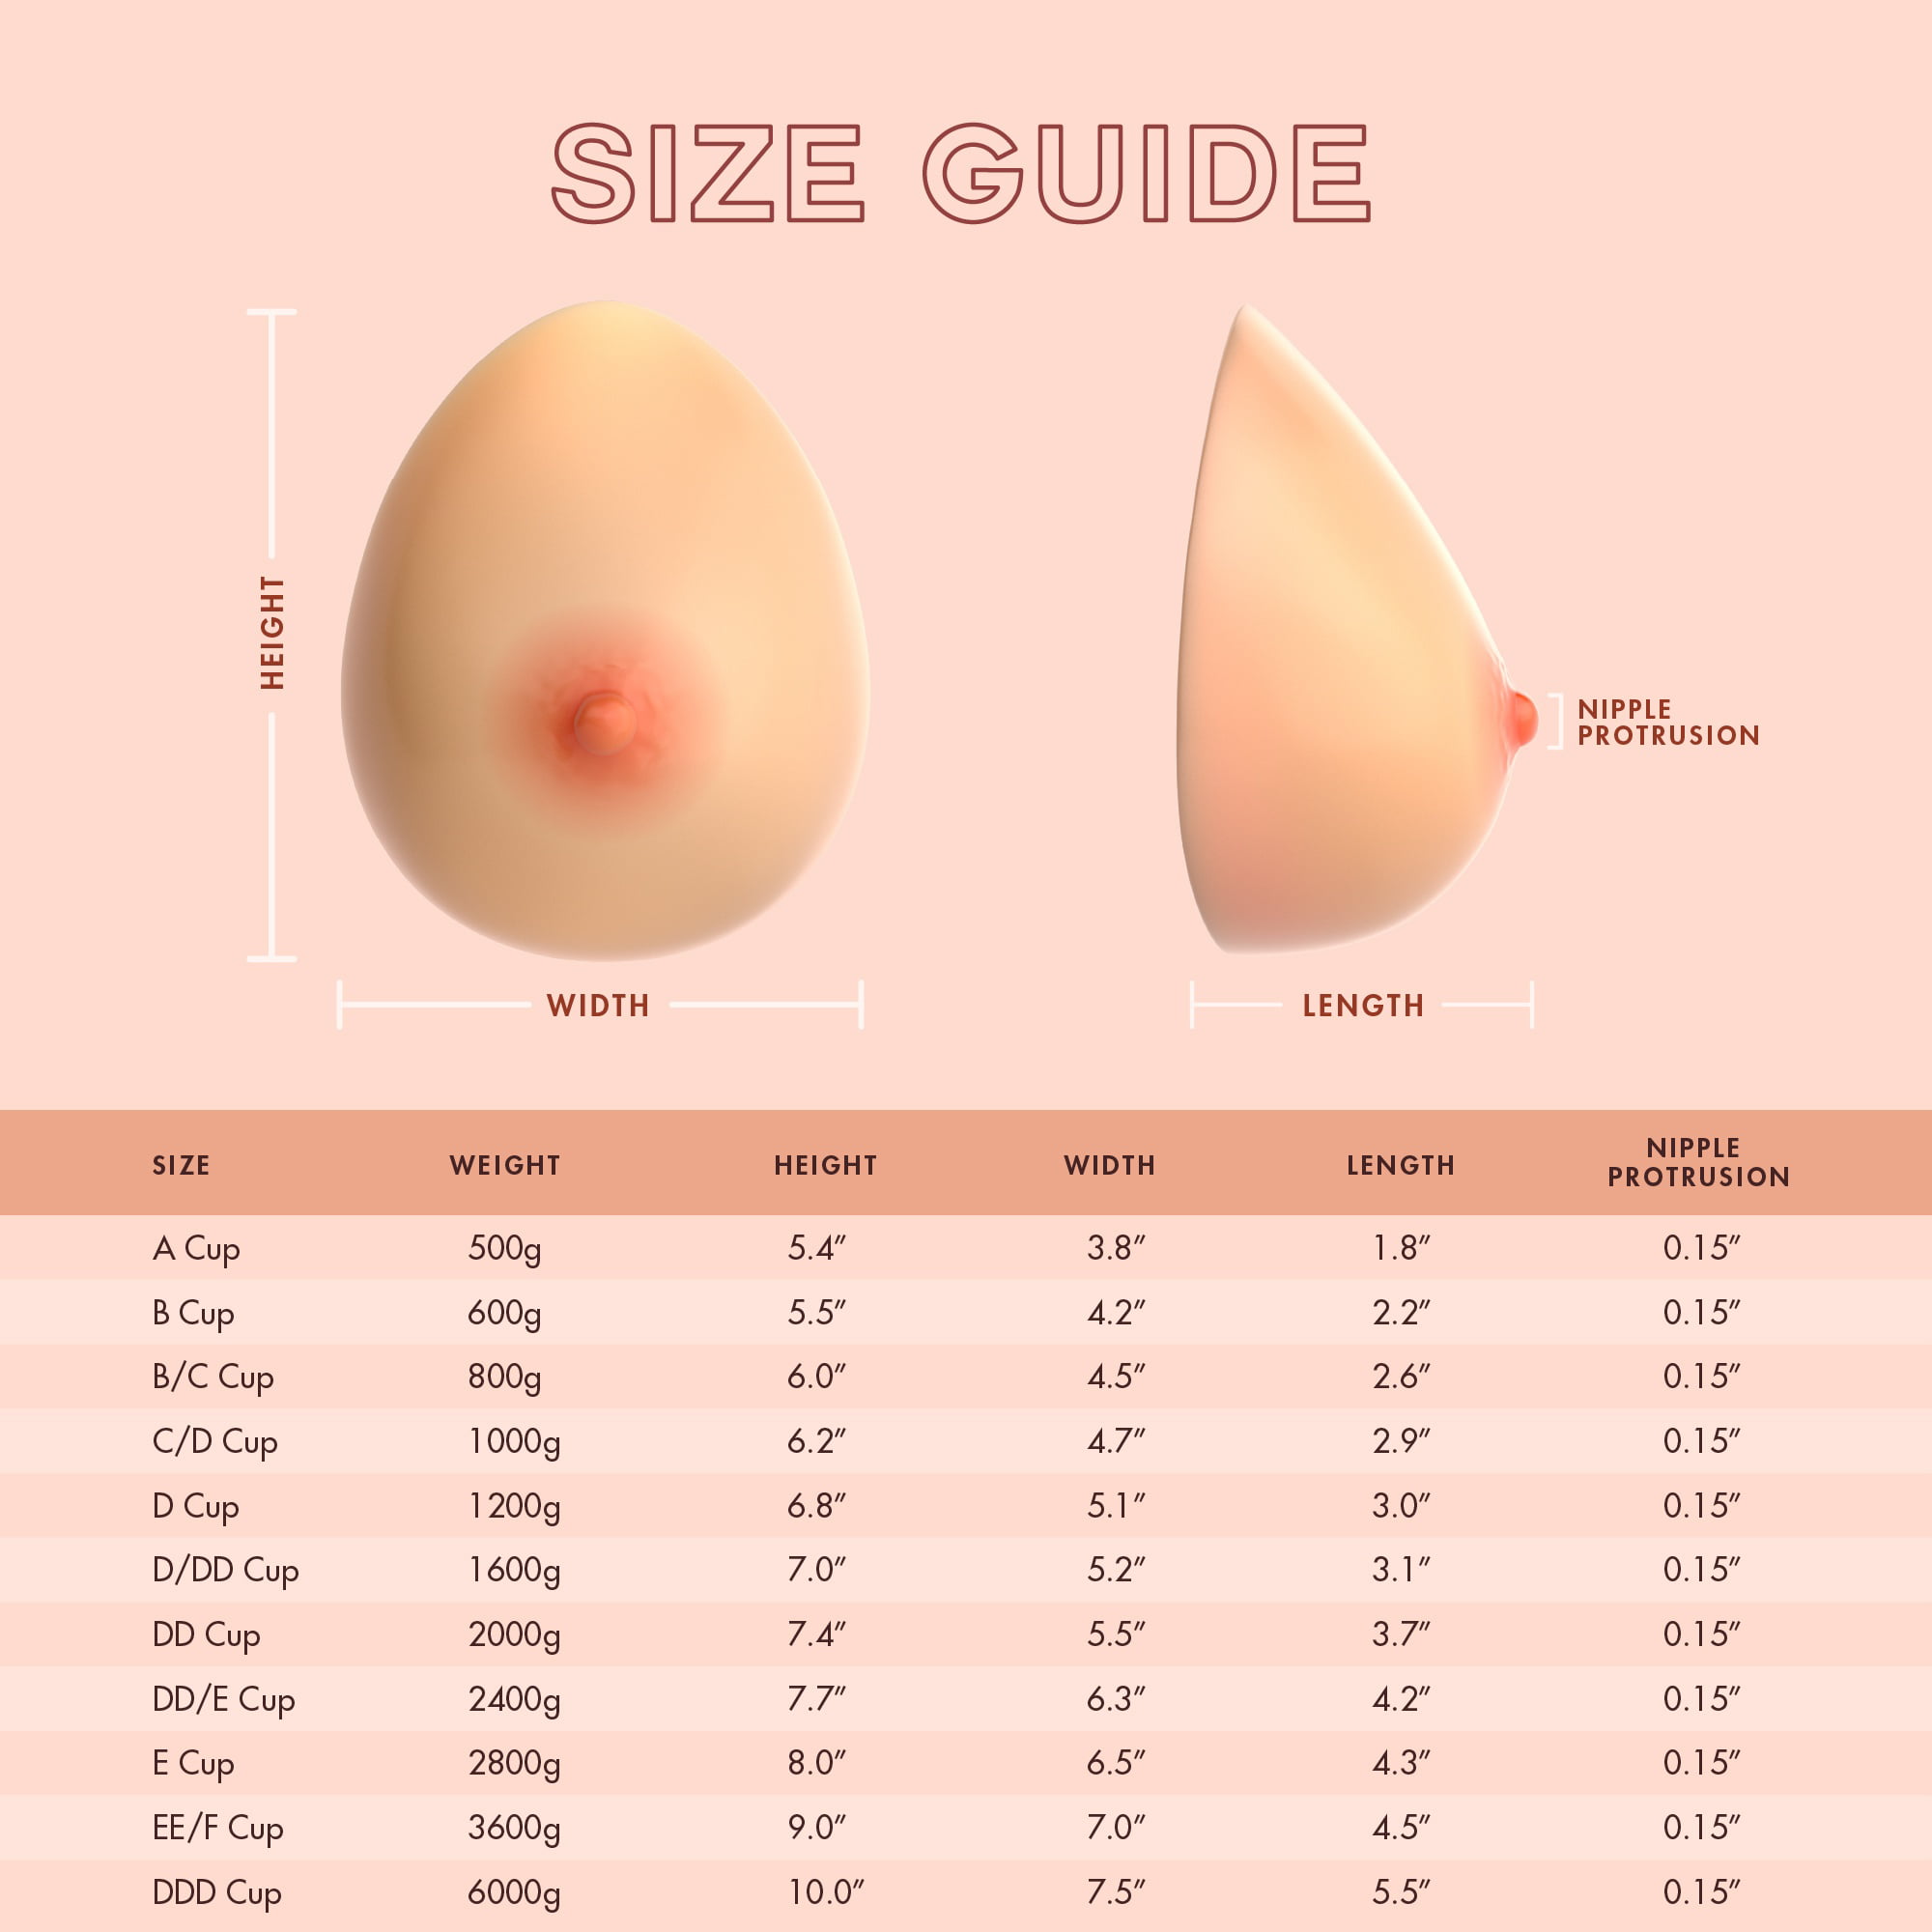 Feminique Silicone Breast Form for Mastectomy, B Cup (600g) Nude